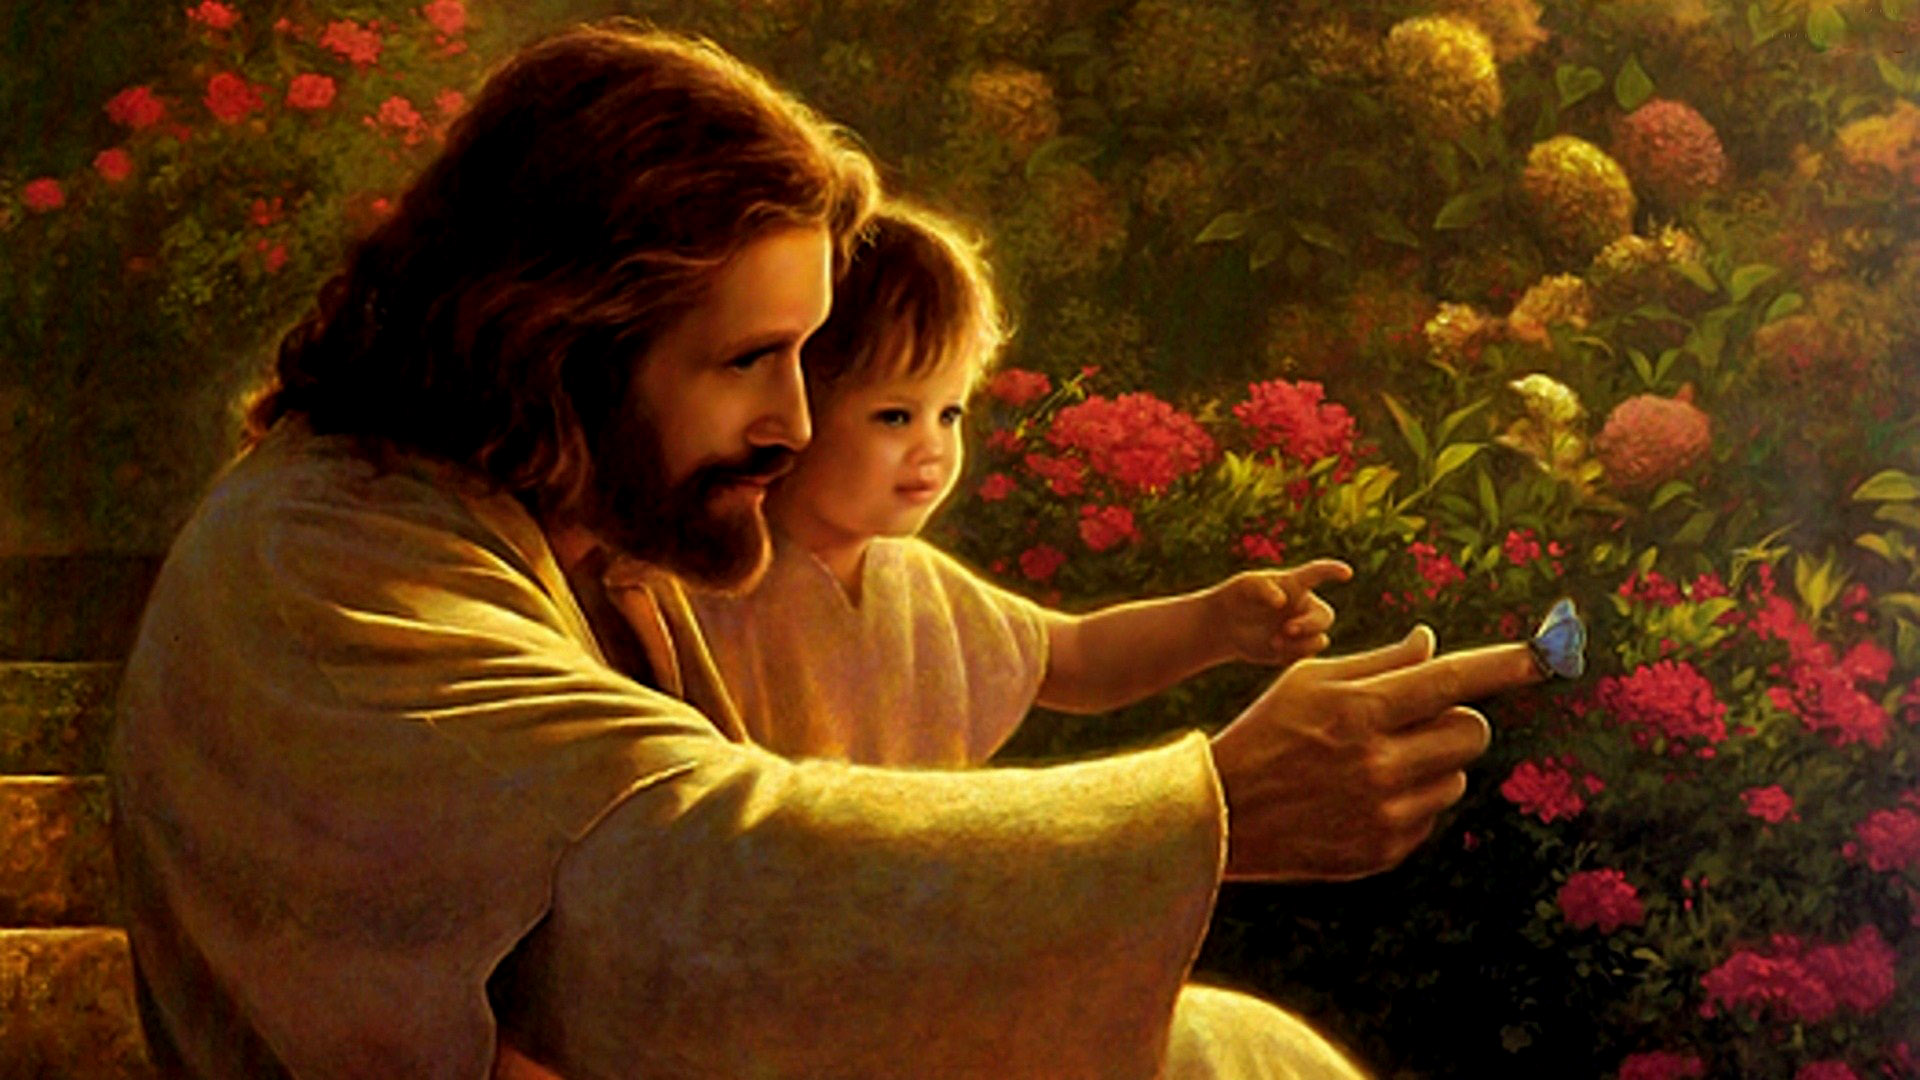 Most Beautiful Jesus Christ Wallpapers - God HD Wallpapers